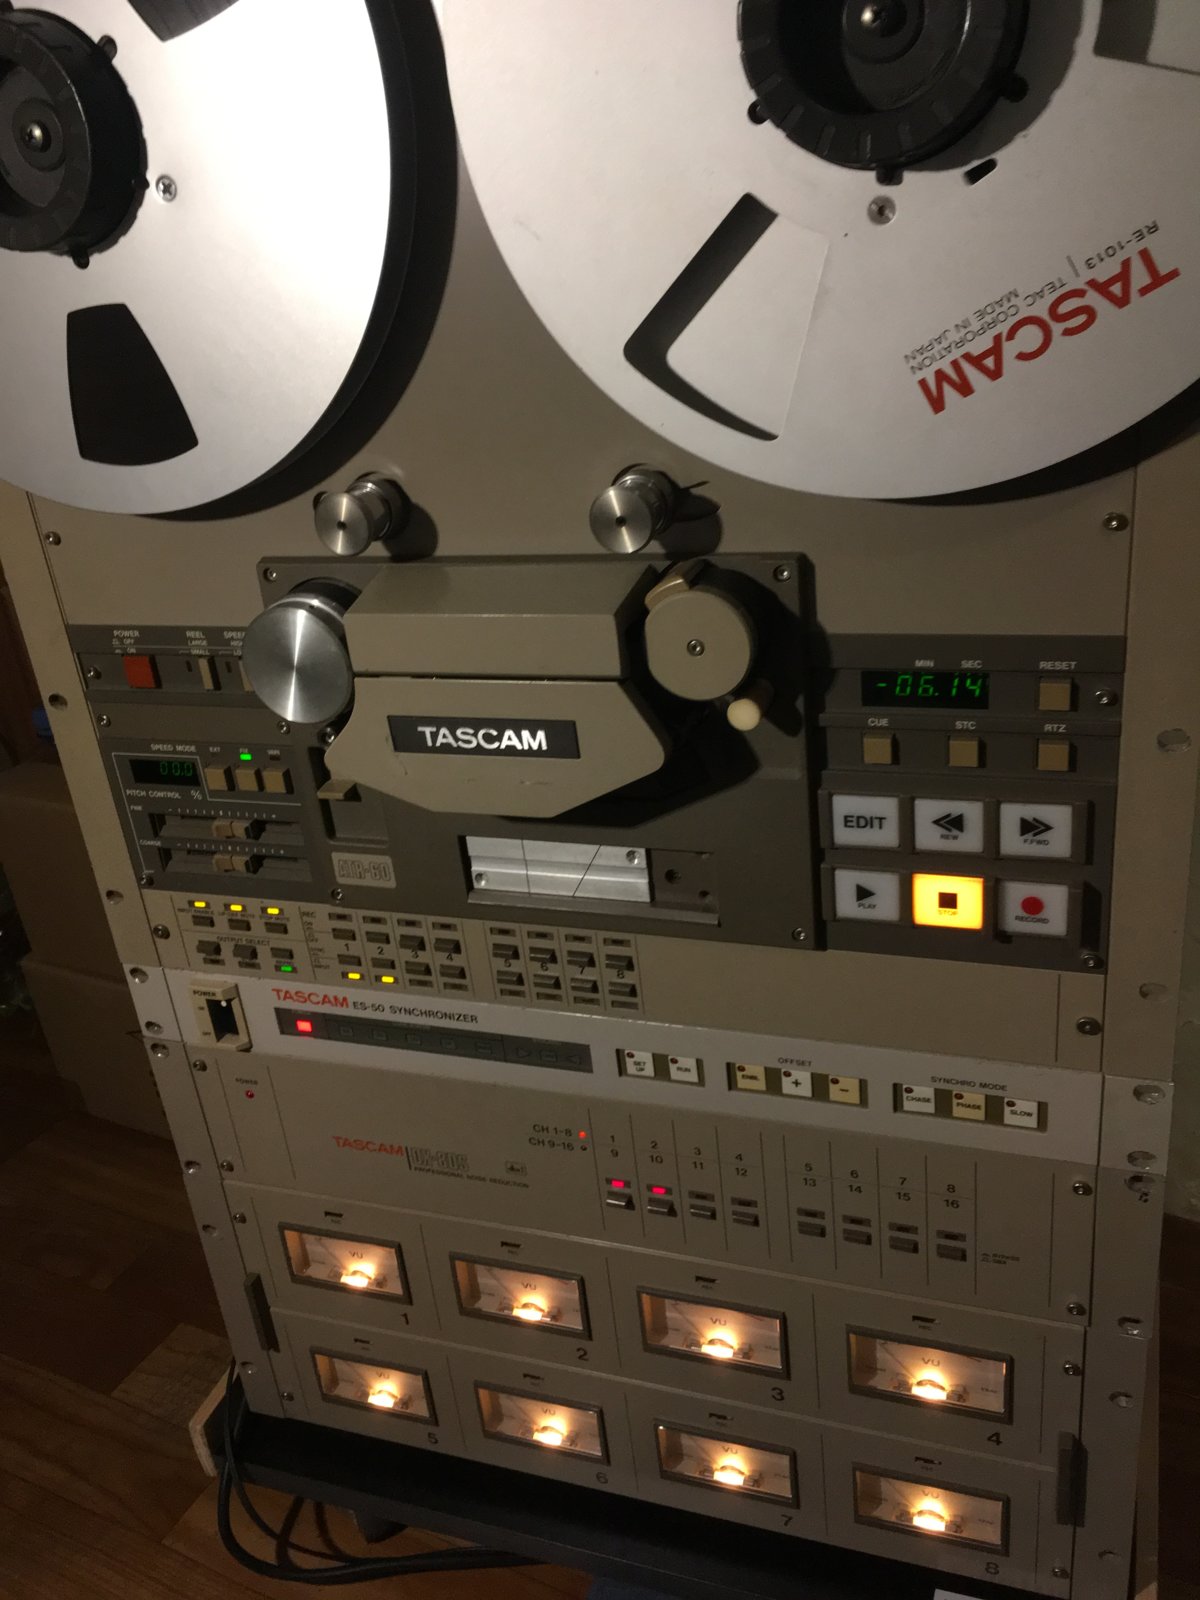 Tascam ATR-60 8 track - Good price? And help to understand (missing manuals)